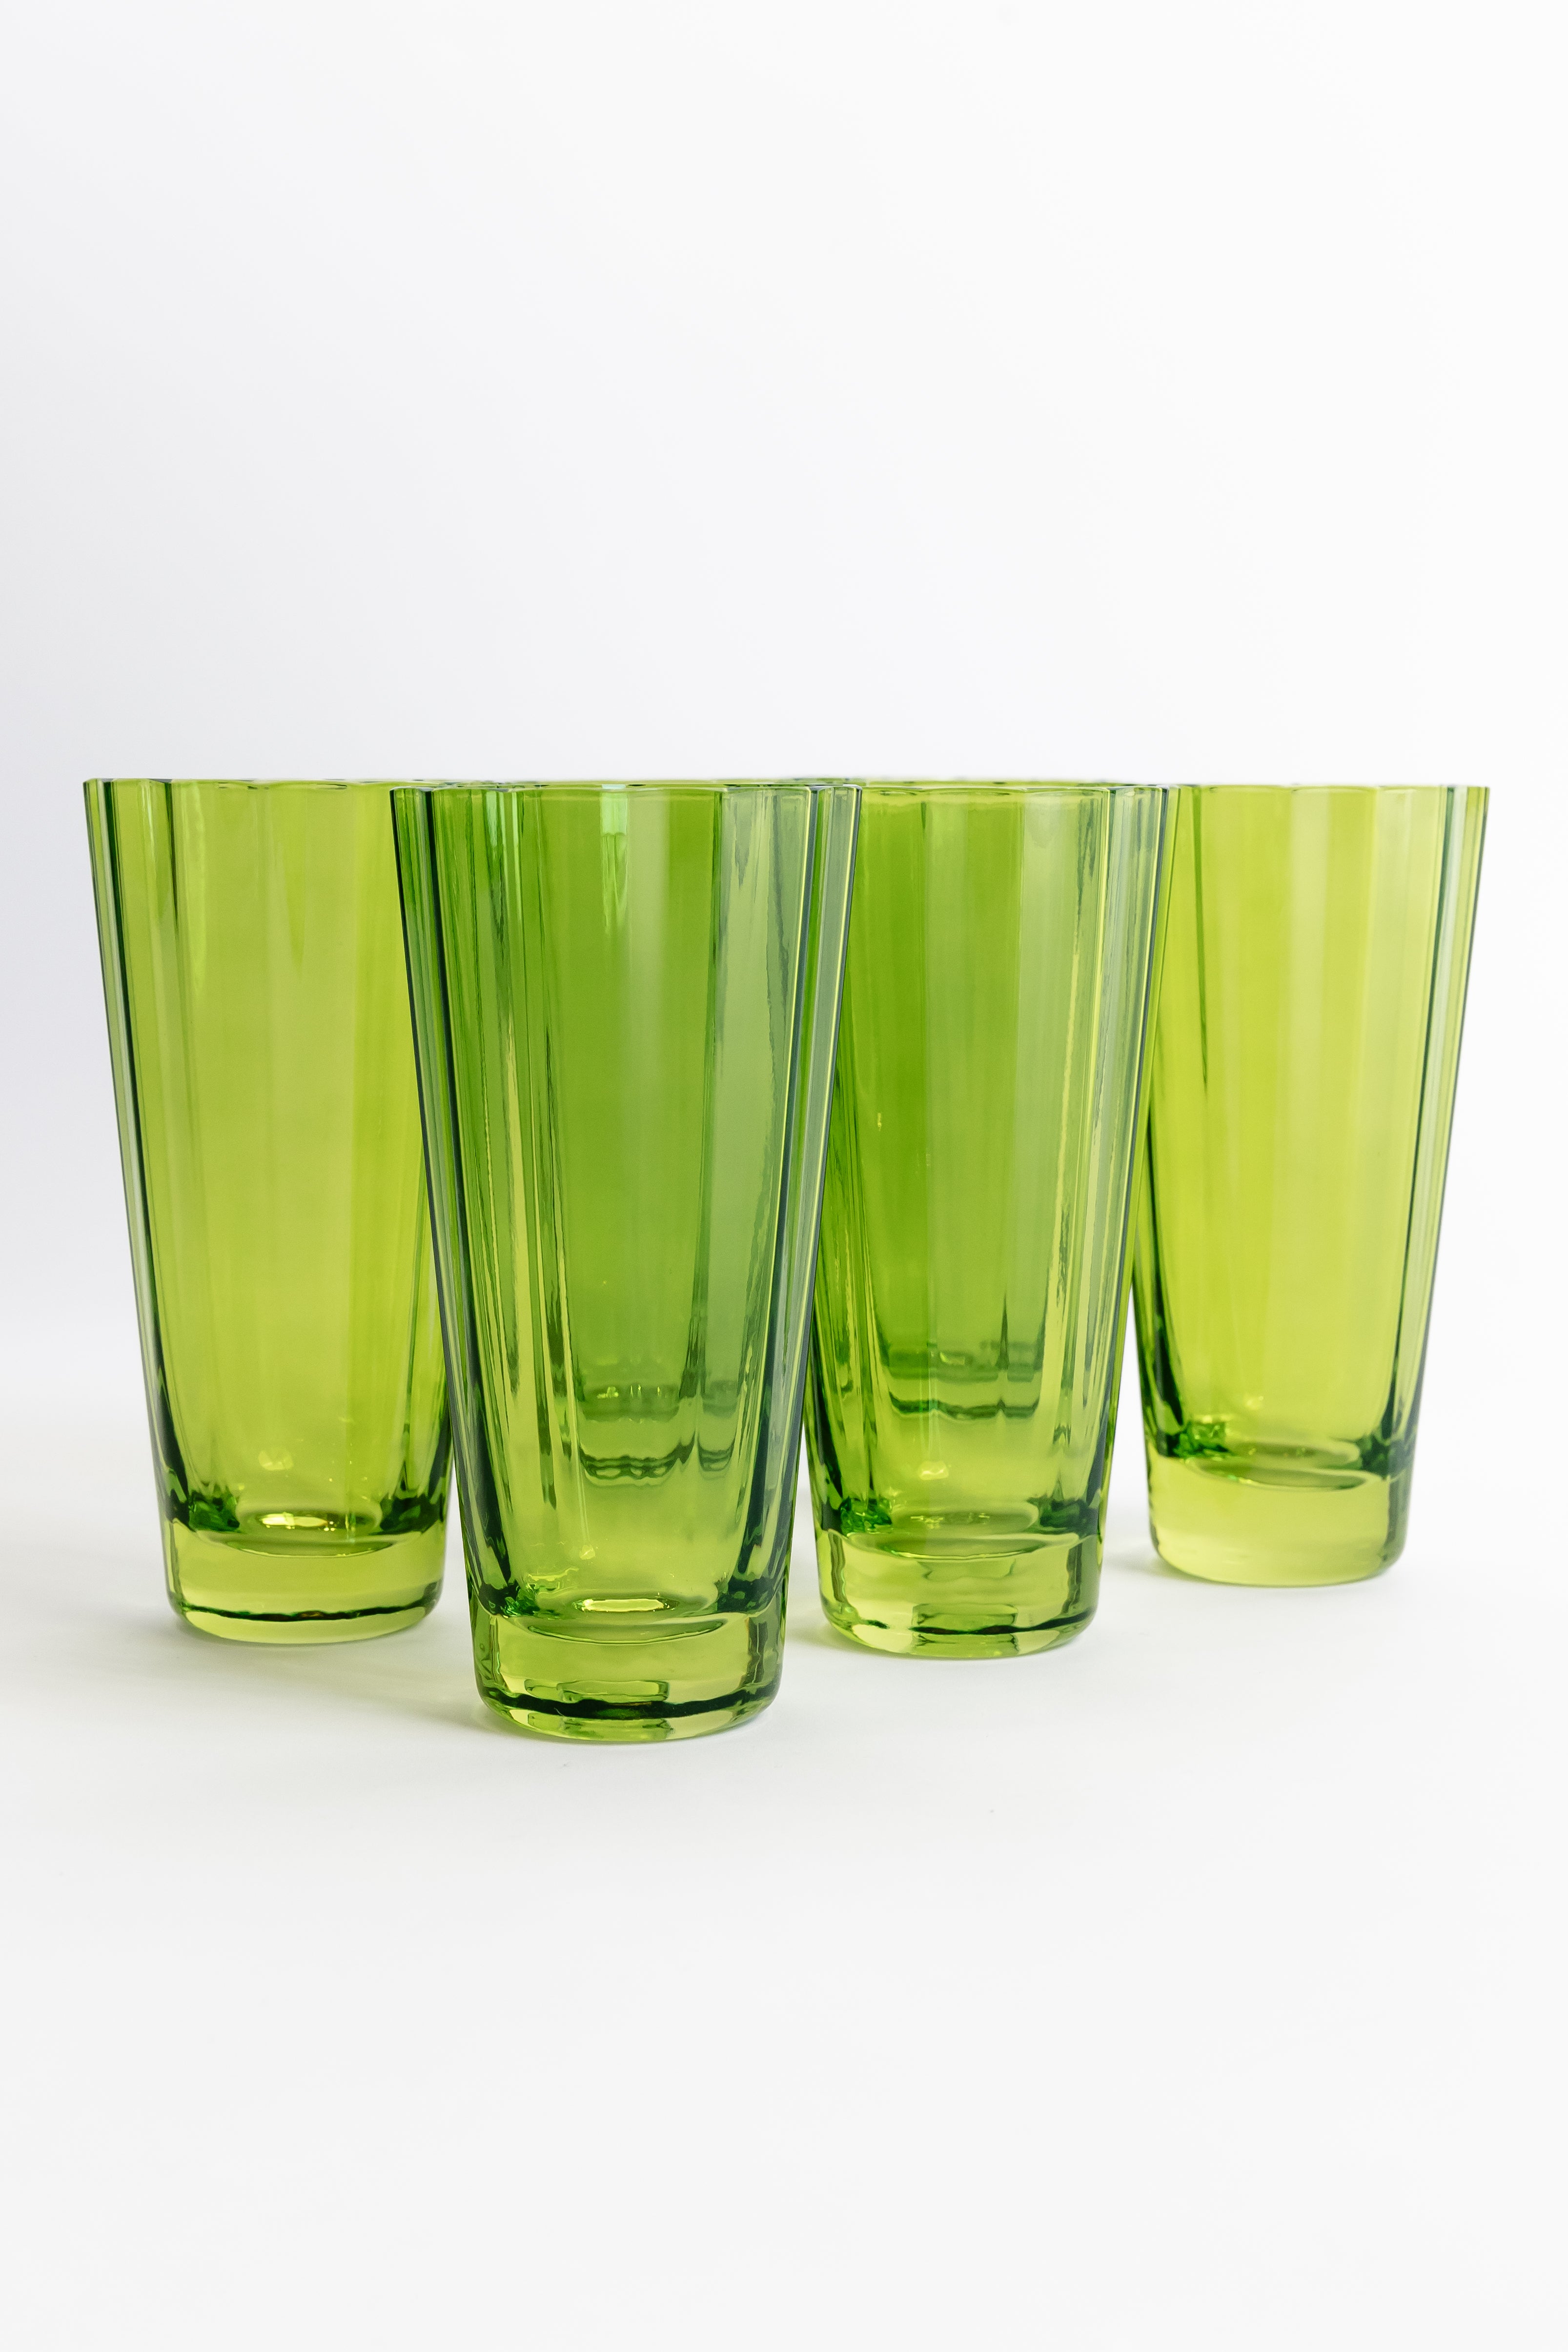 Estelle Colored Sunday High Balls - Set of 6 {Forest Green}